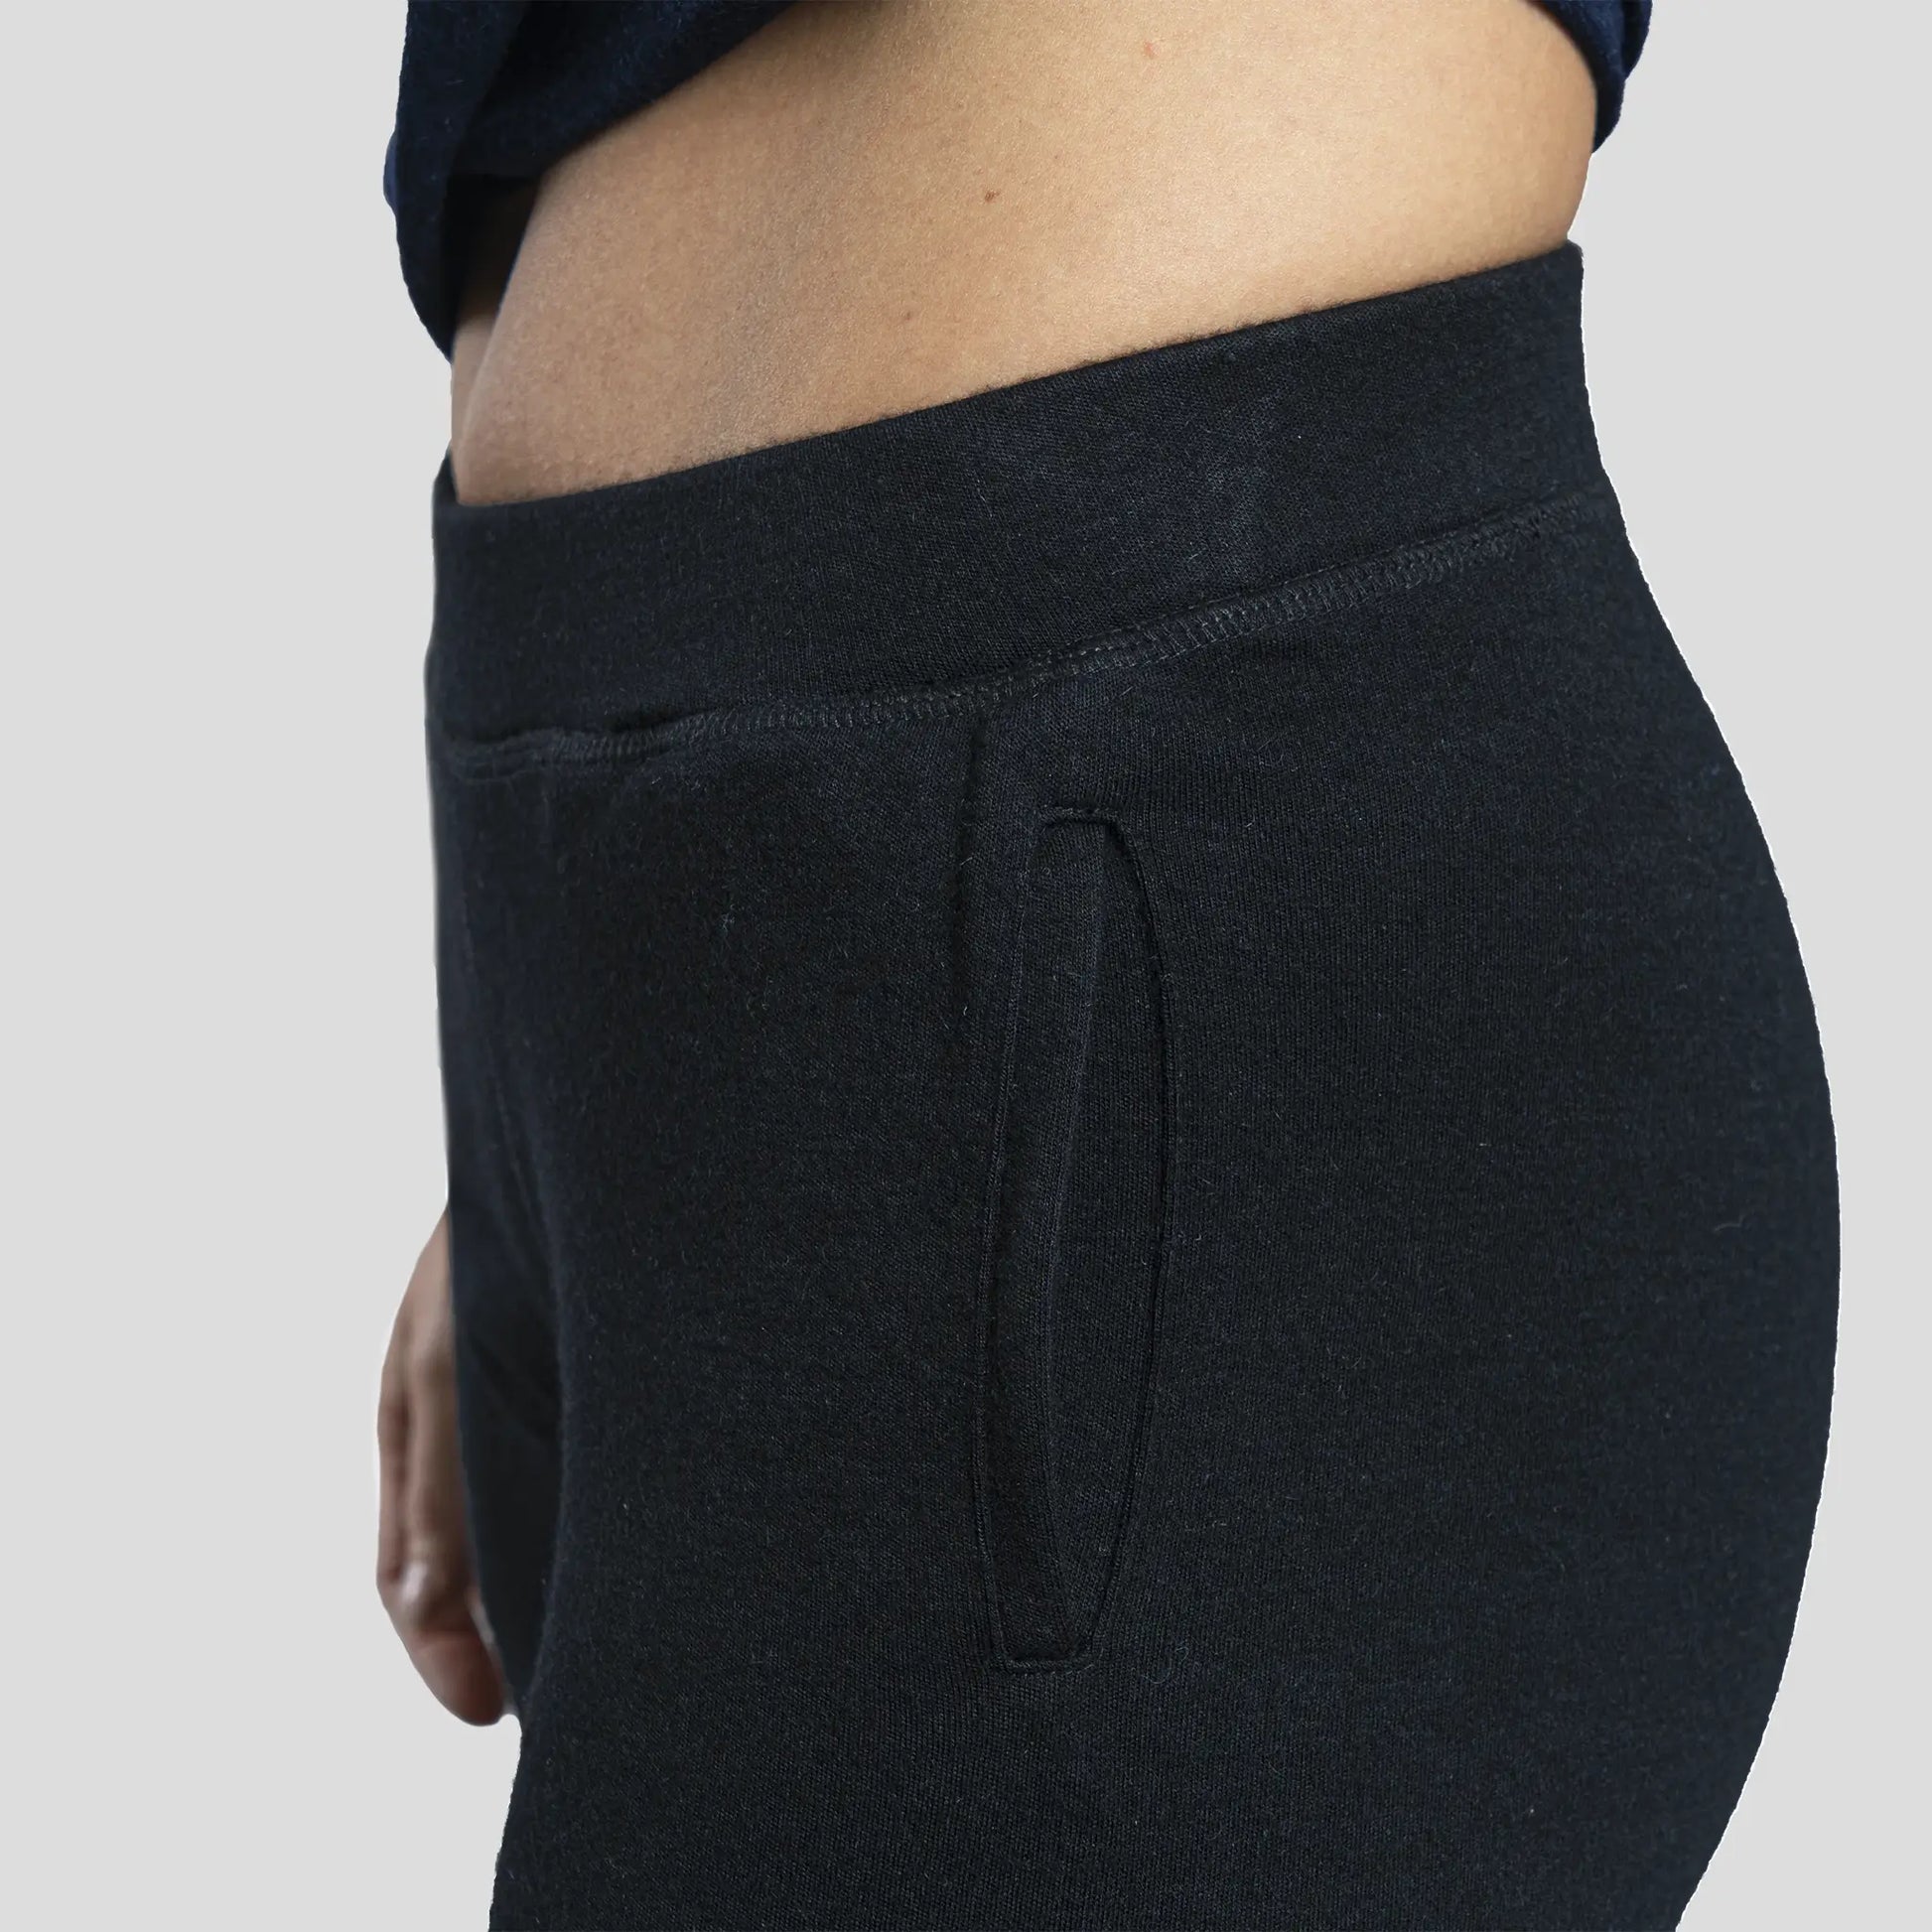 Women's Lounging Pack: 2x T-Shirts & Arms of Andes Sweatpants cover